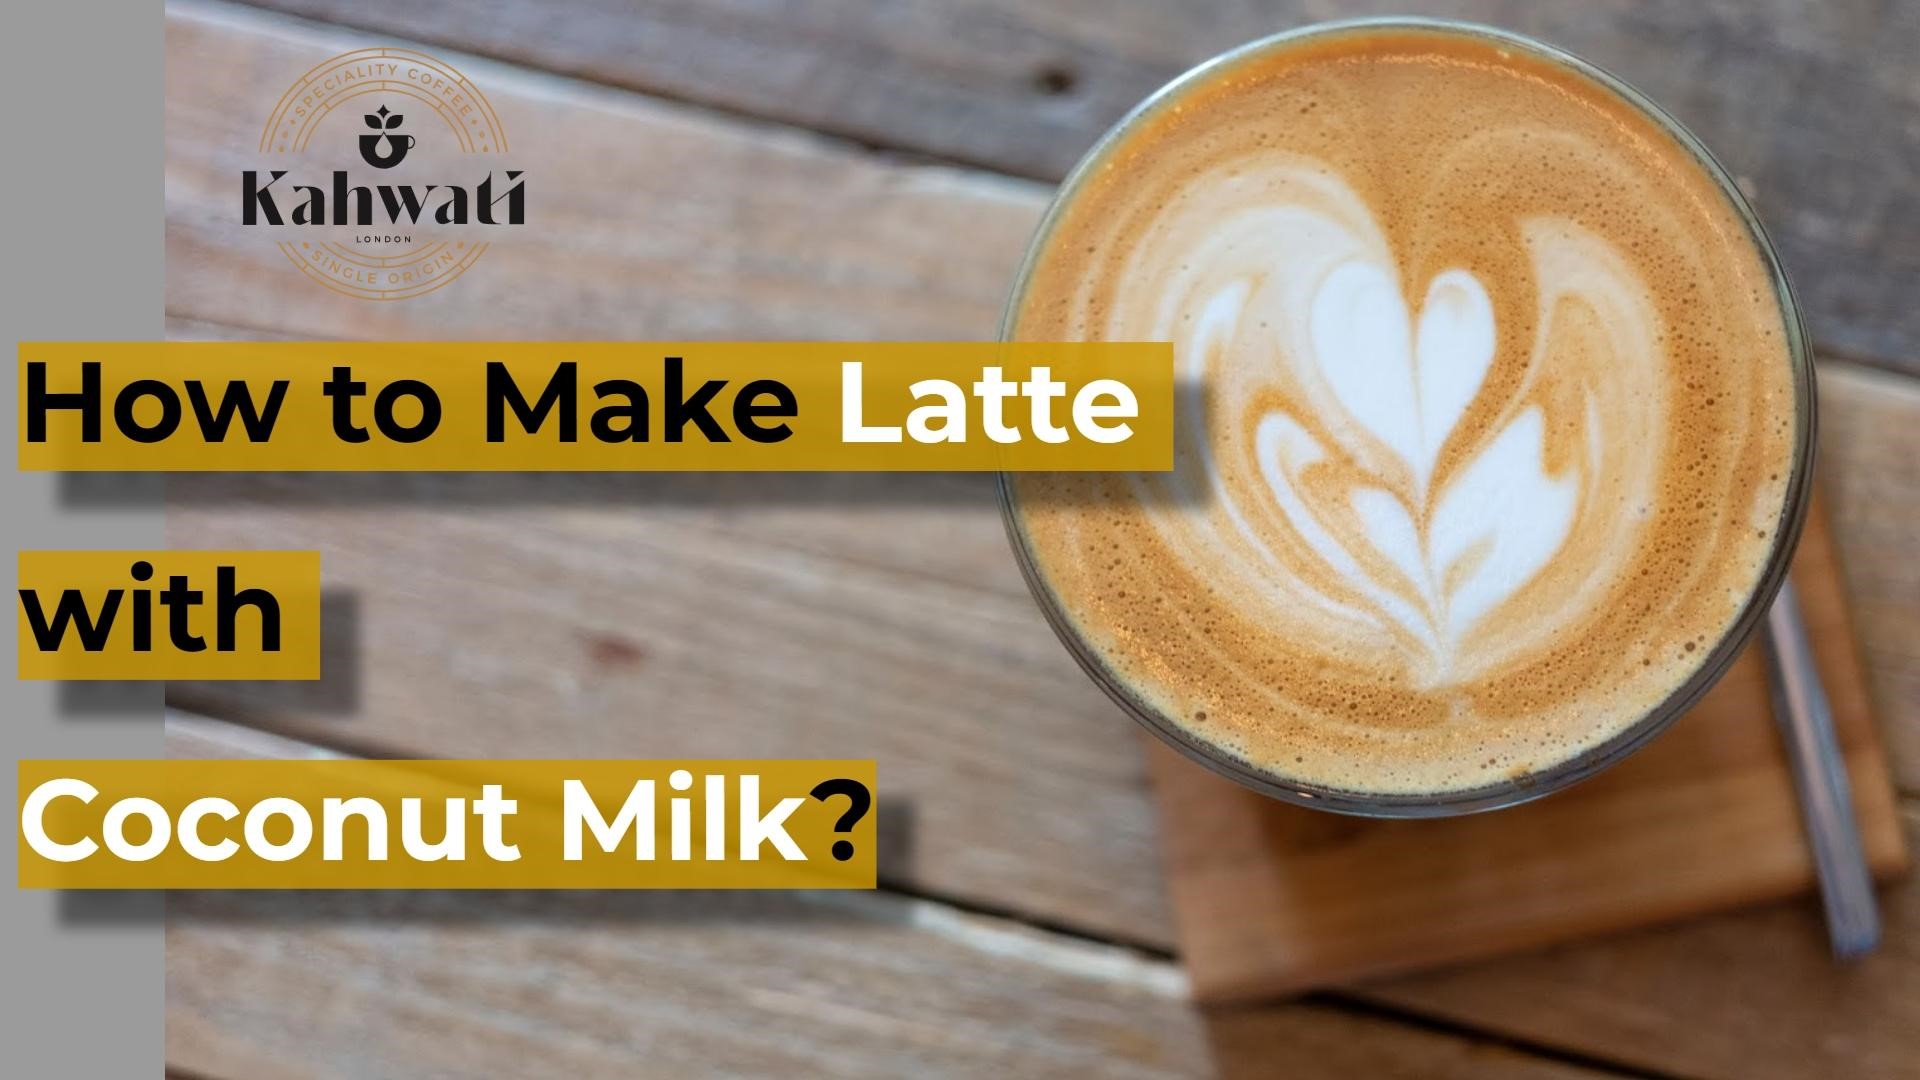 How to Make Latte with Coconut Milk 4 Easy Steps